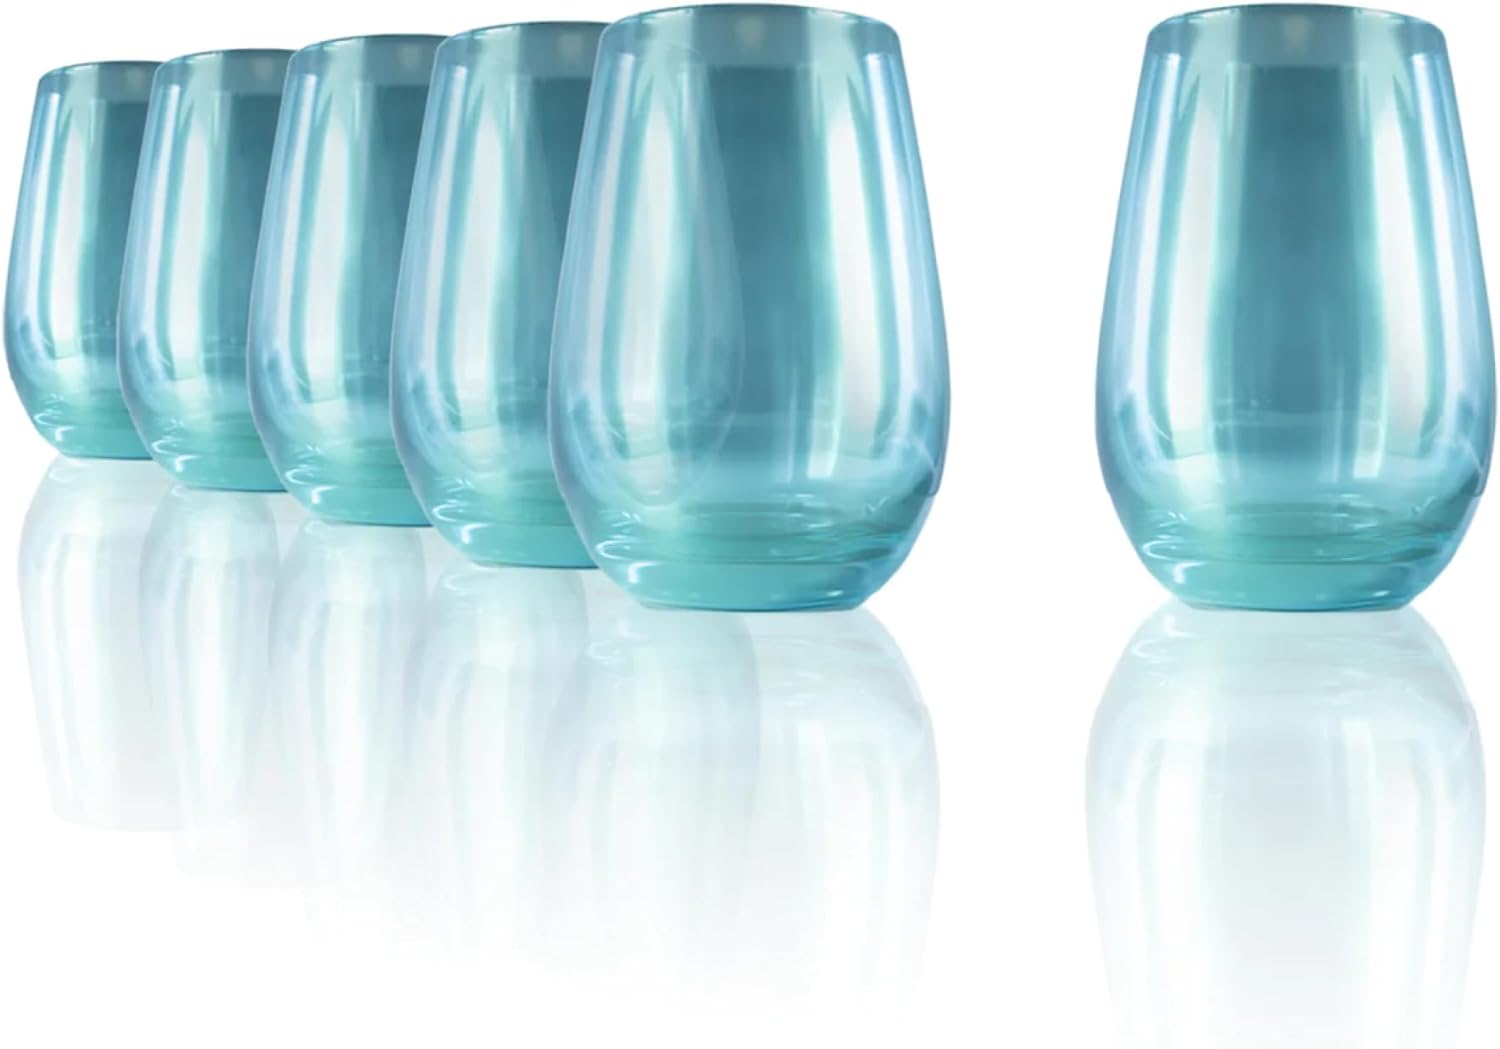 Stölzle Lausitz Long Drink Cups Mirror Turquoise / Set of 6 Drinking Glasses / Cocktail Glasses / High-Quality Long Drink Glasses Set in Mirrored Look / Gin Glasses / Highball Glasses